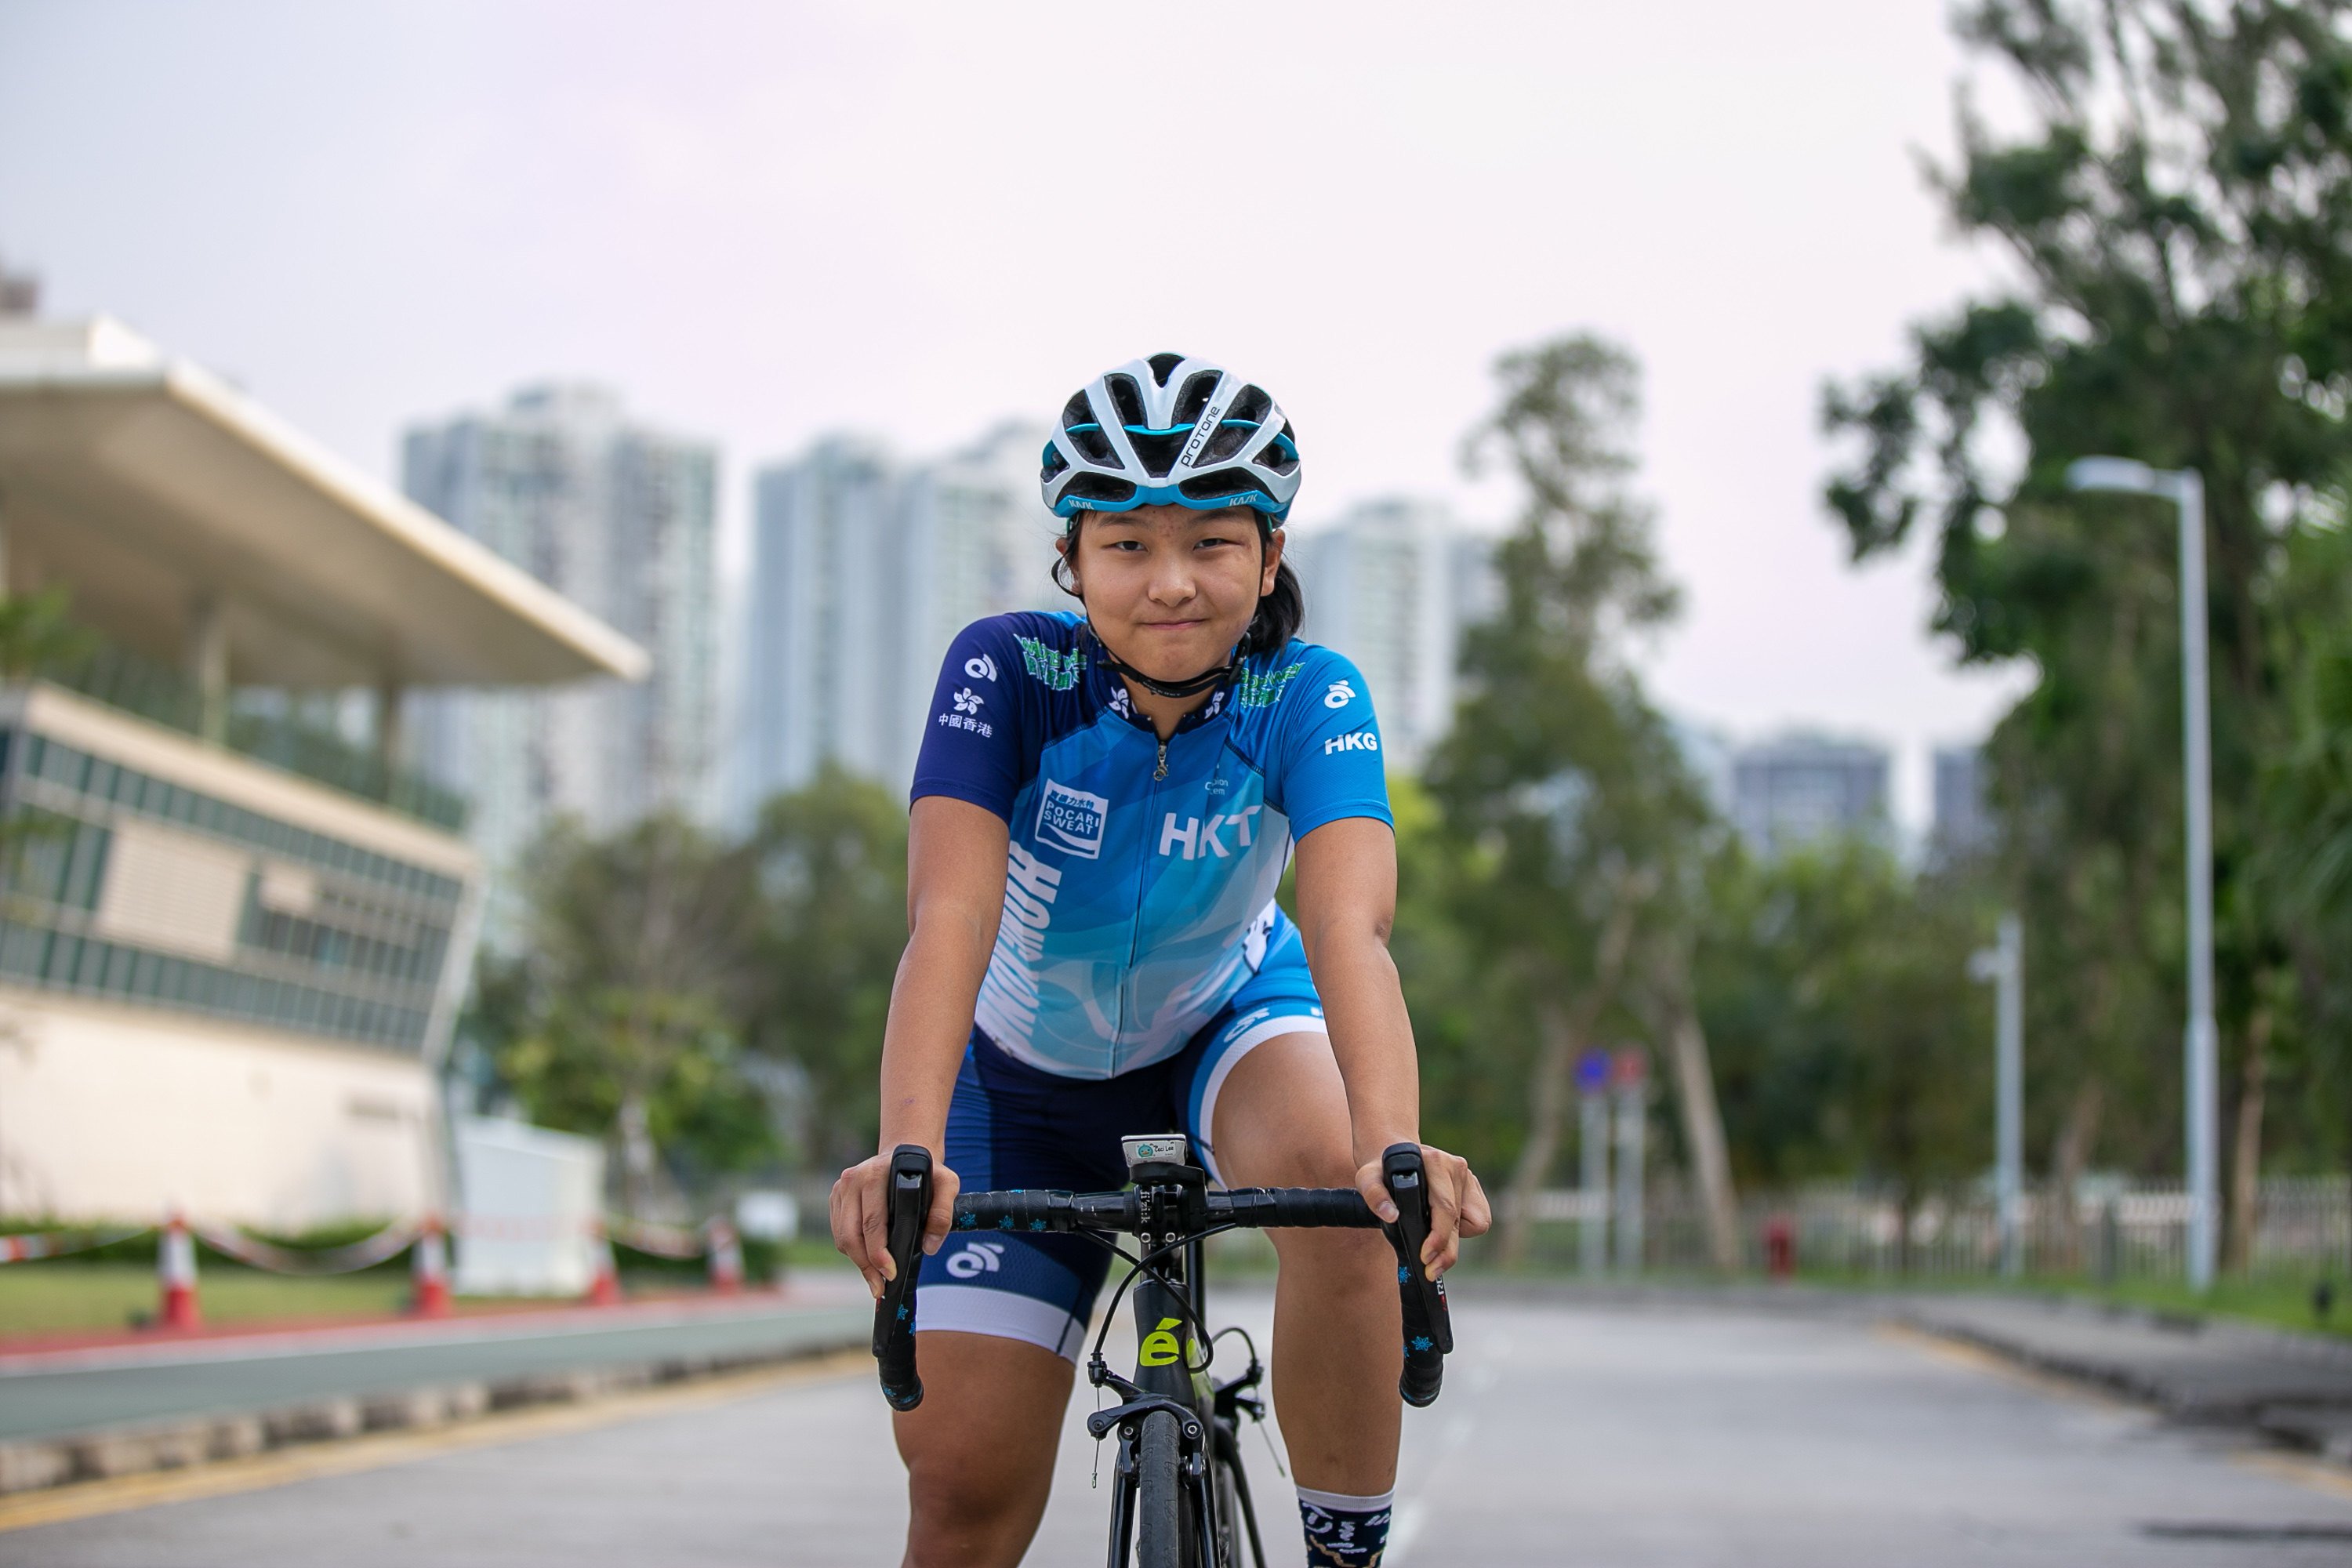 Lee Sze-wing ended her year with a win in the Omnium. Photo: Handout